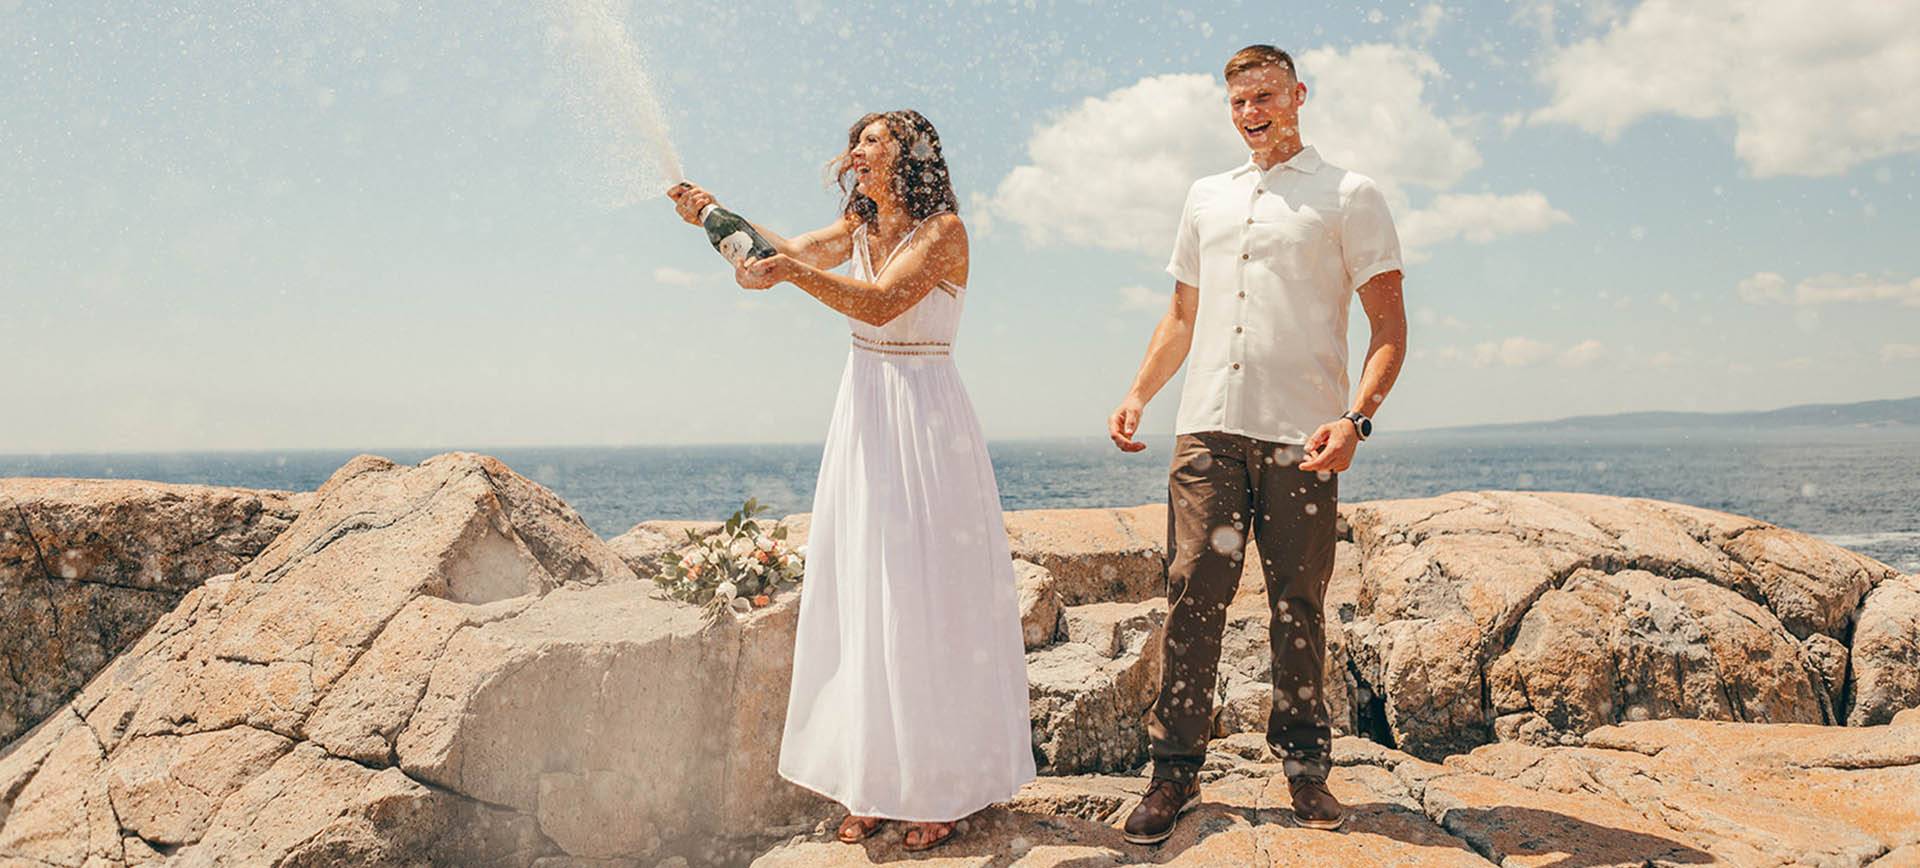 acadia national park wedding - bride & groom celebrating with champagne at the beach